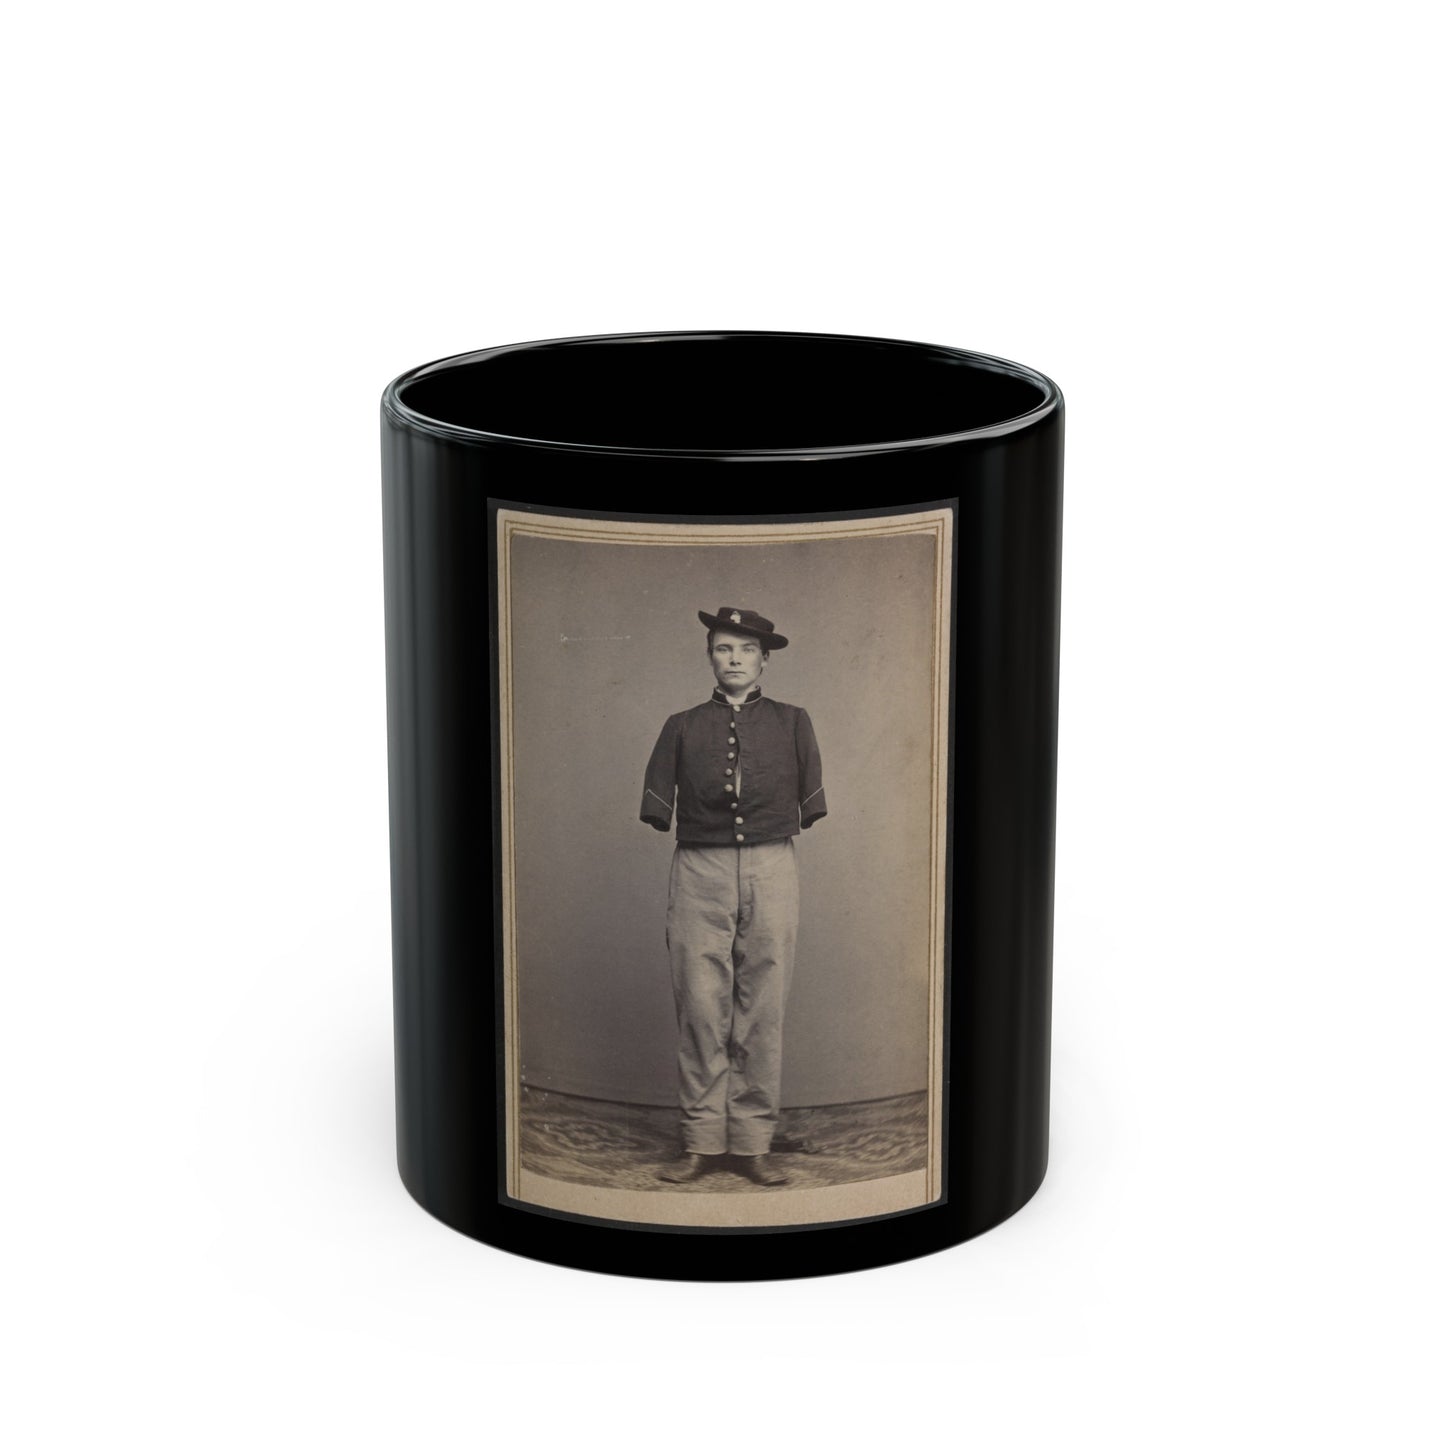 Private William Sargent Of Co. E, 53rd Pennsylvania Infantry Regiment, In Uniform, After The Amputation Of Both Arms (U.S. Civil War) Black Coffee Mug